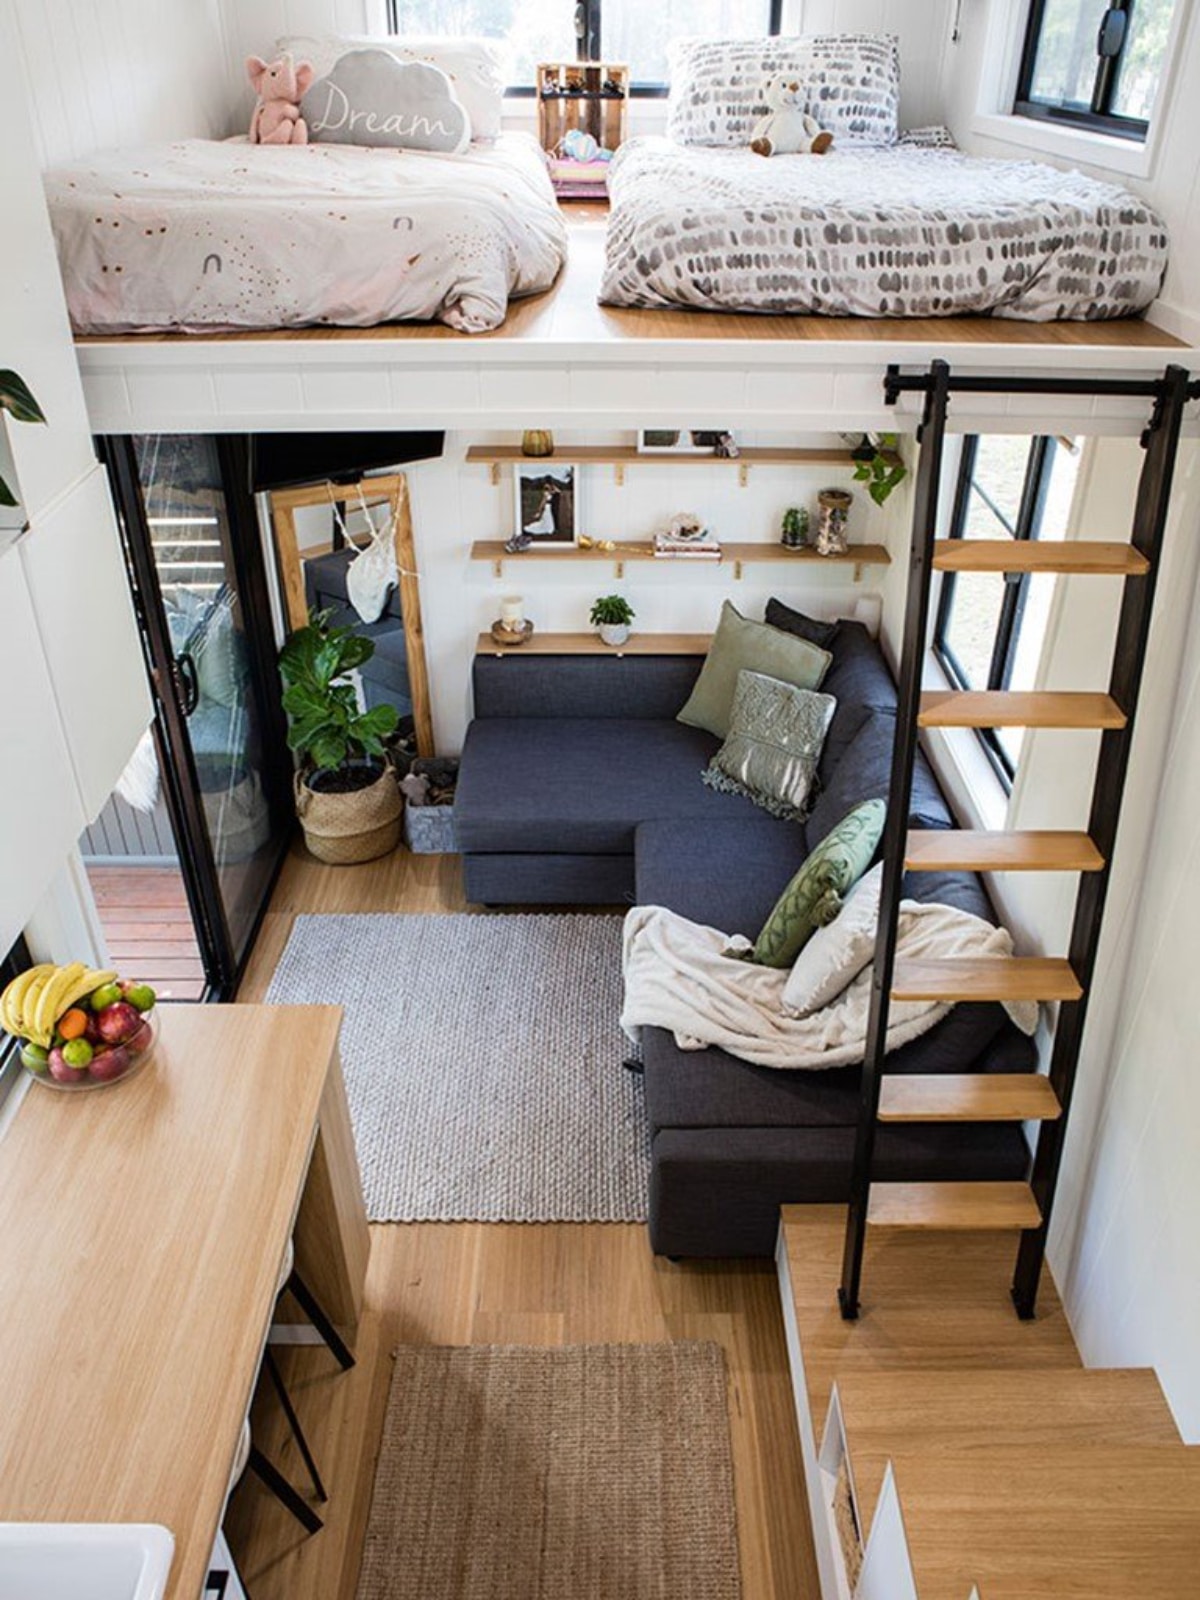 High view of loft style tiny home